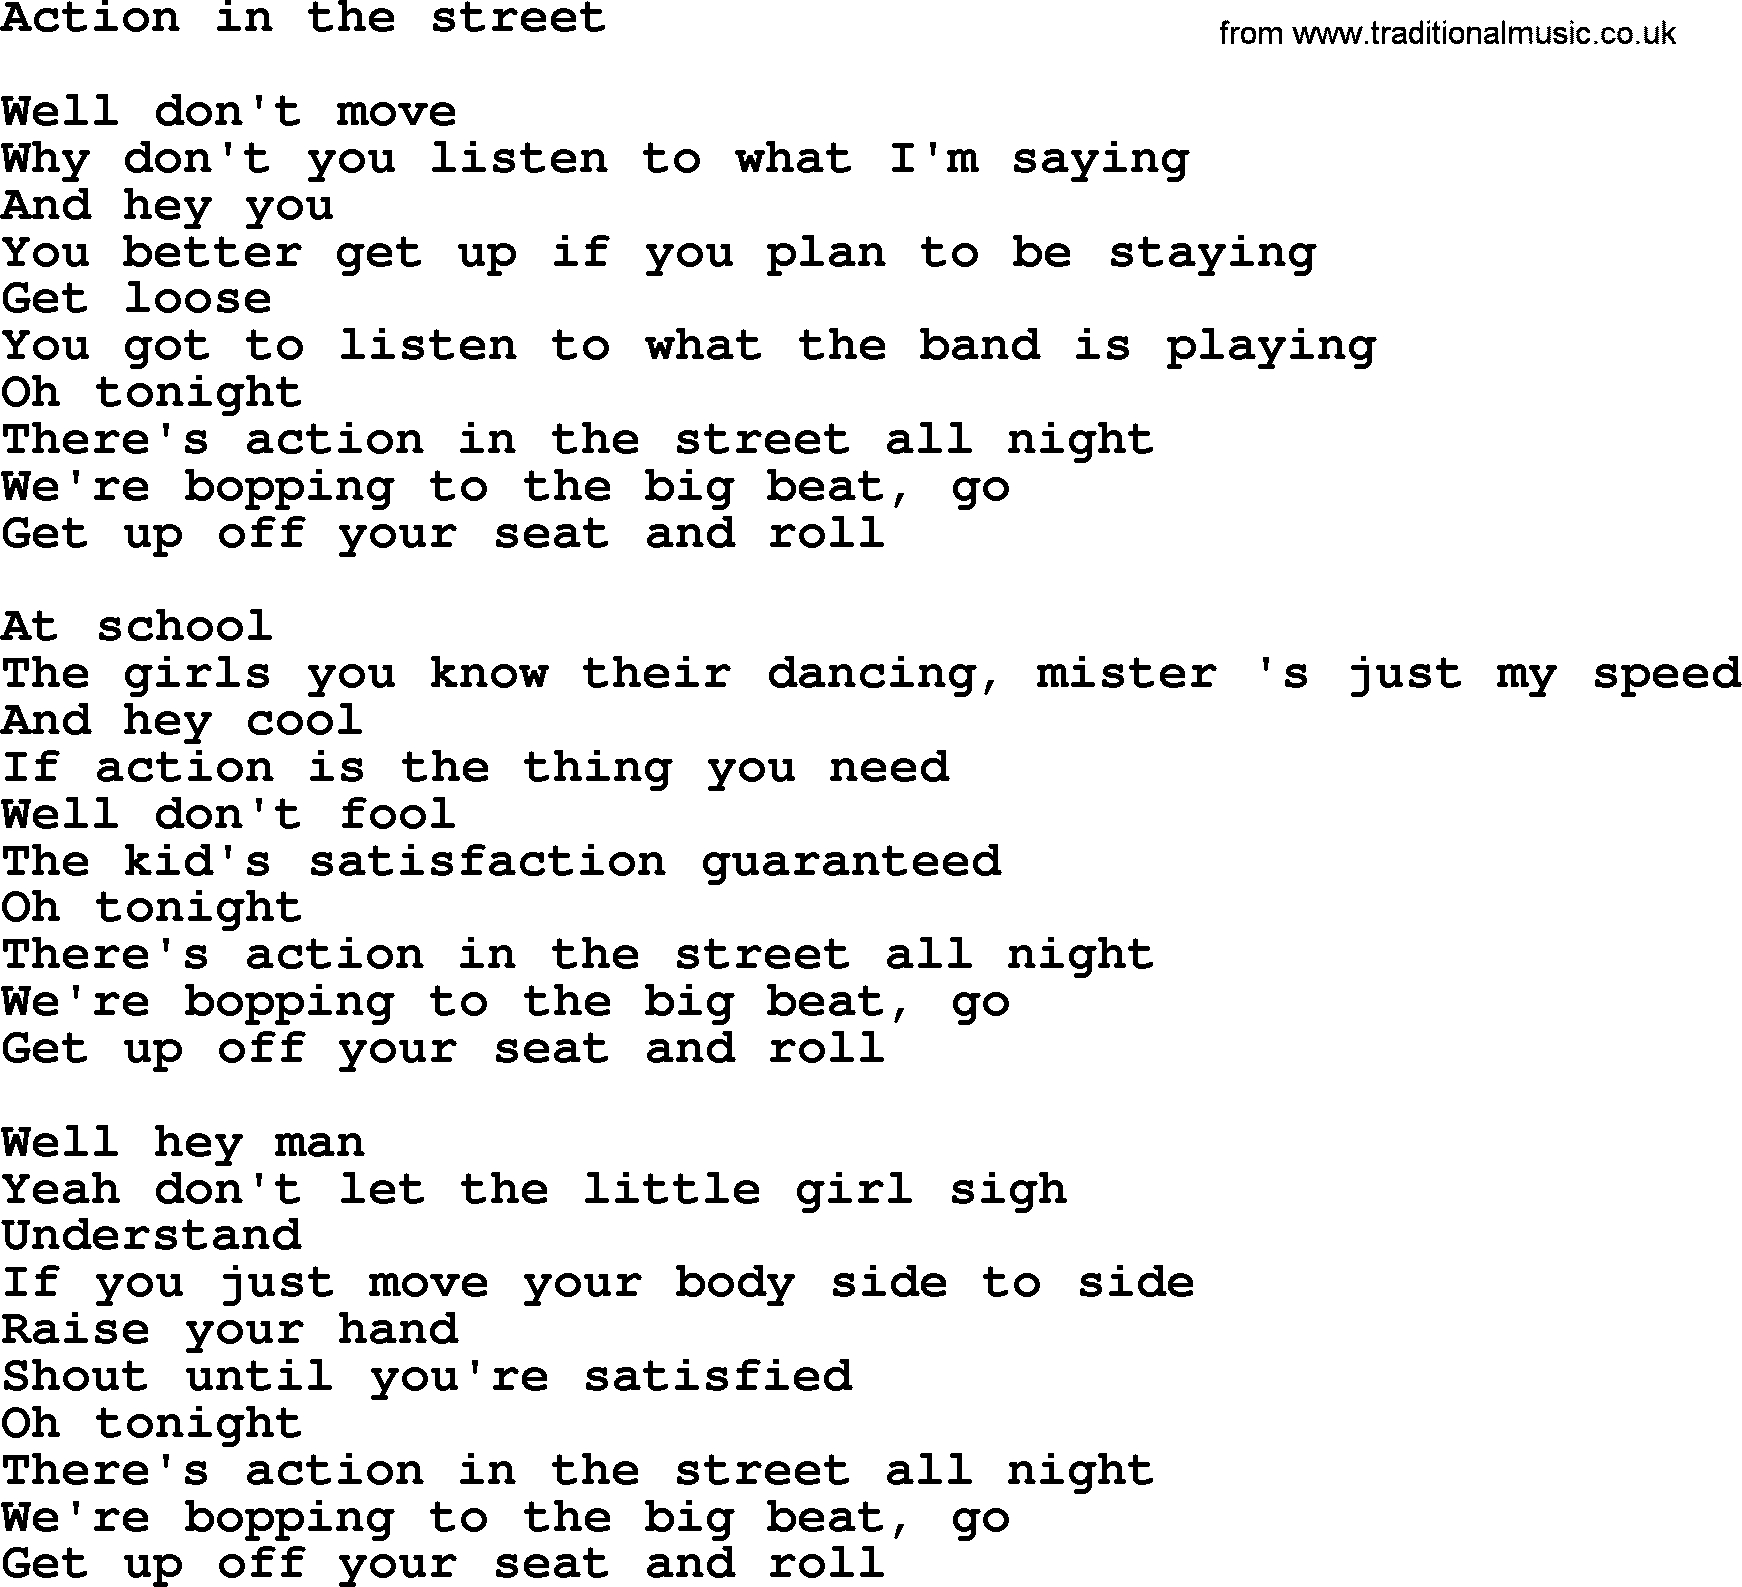 Bruce Springsteen song: Action In The Street lyrics